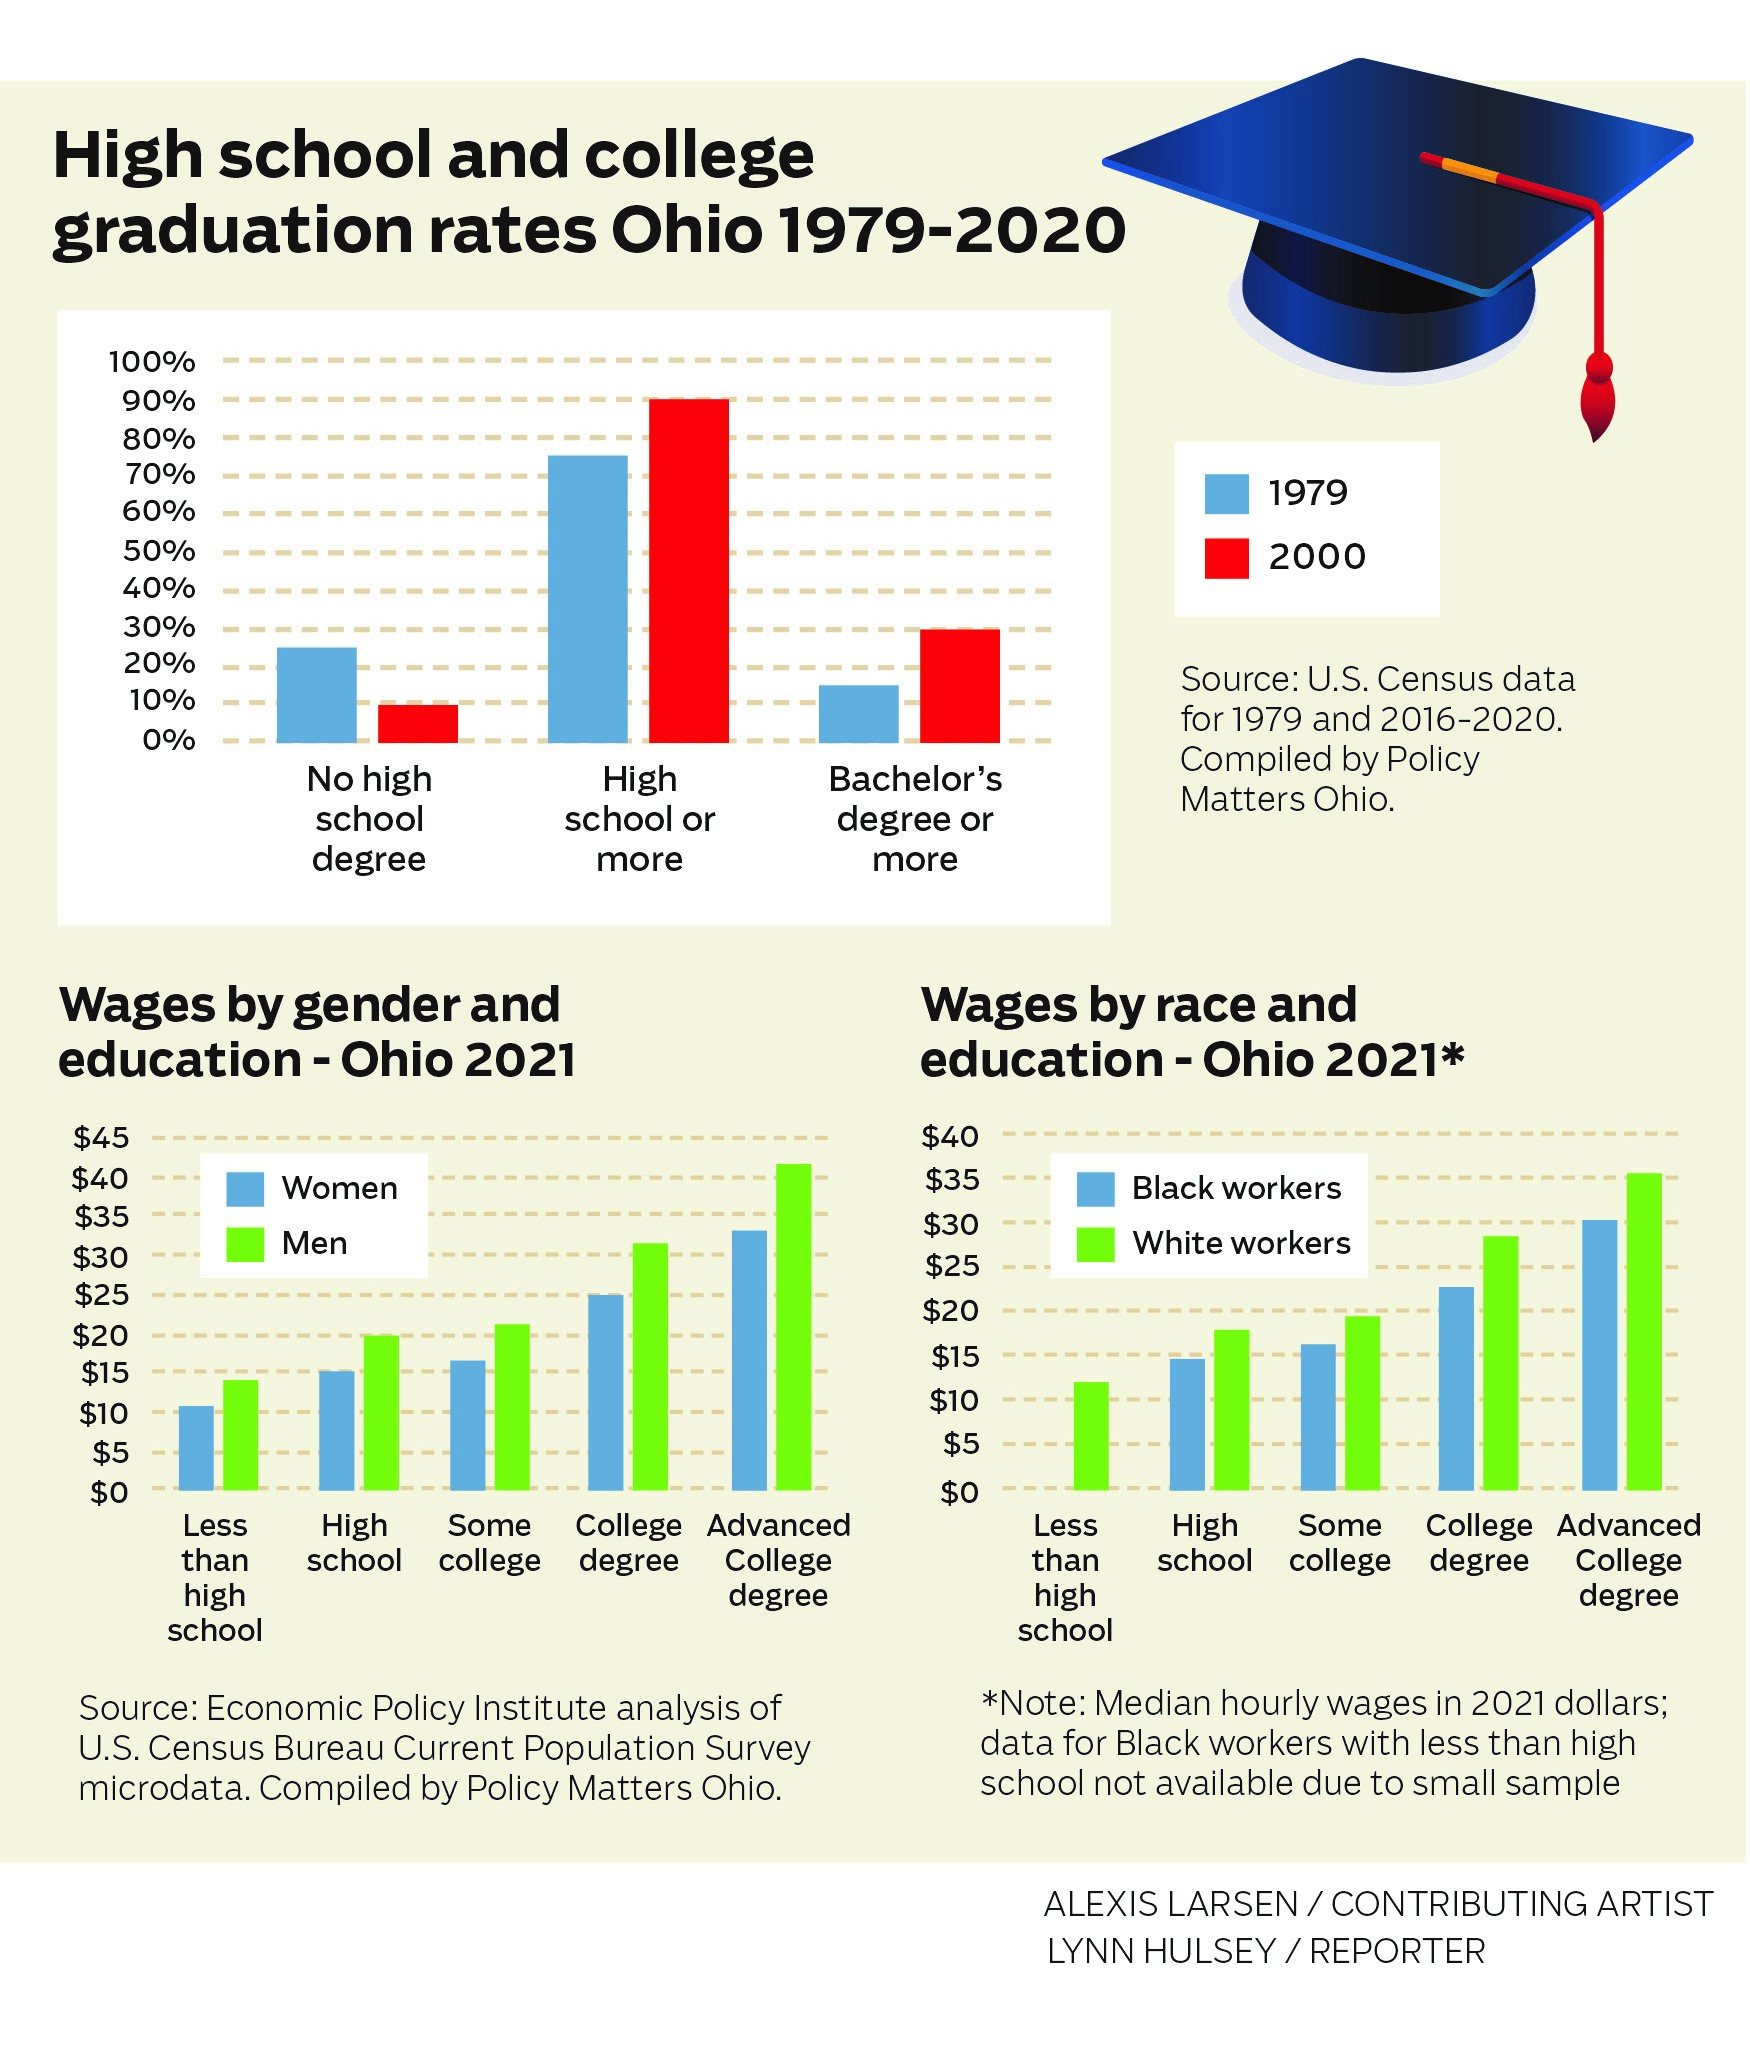 Graduation Rates and Wages - Race and Education